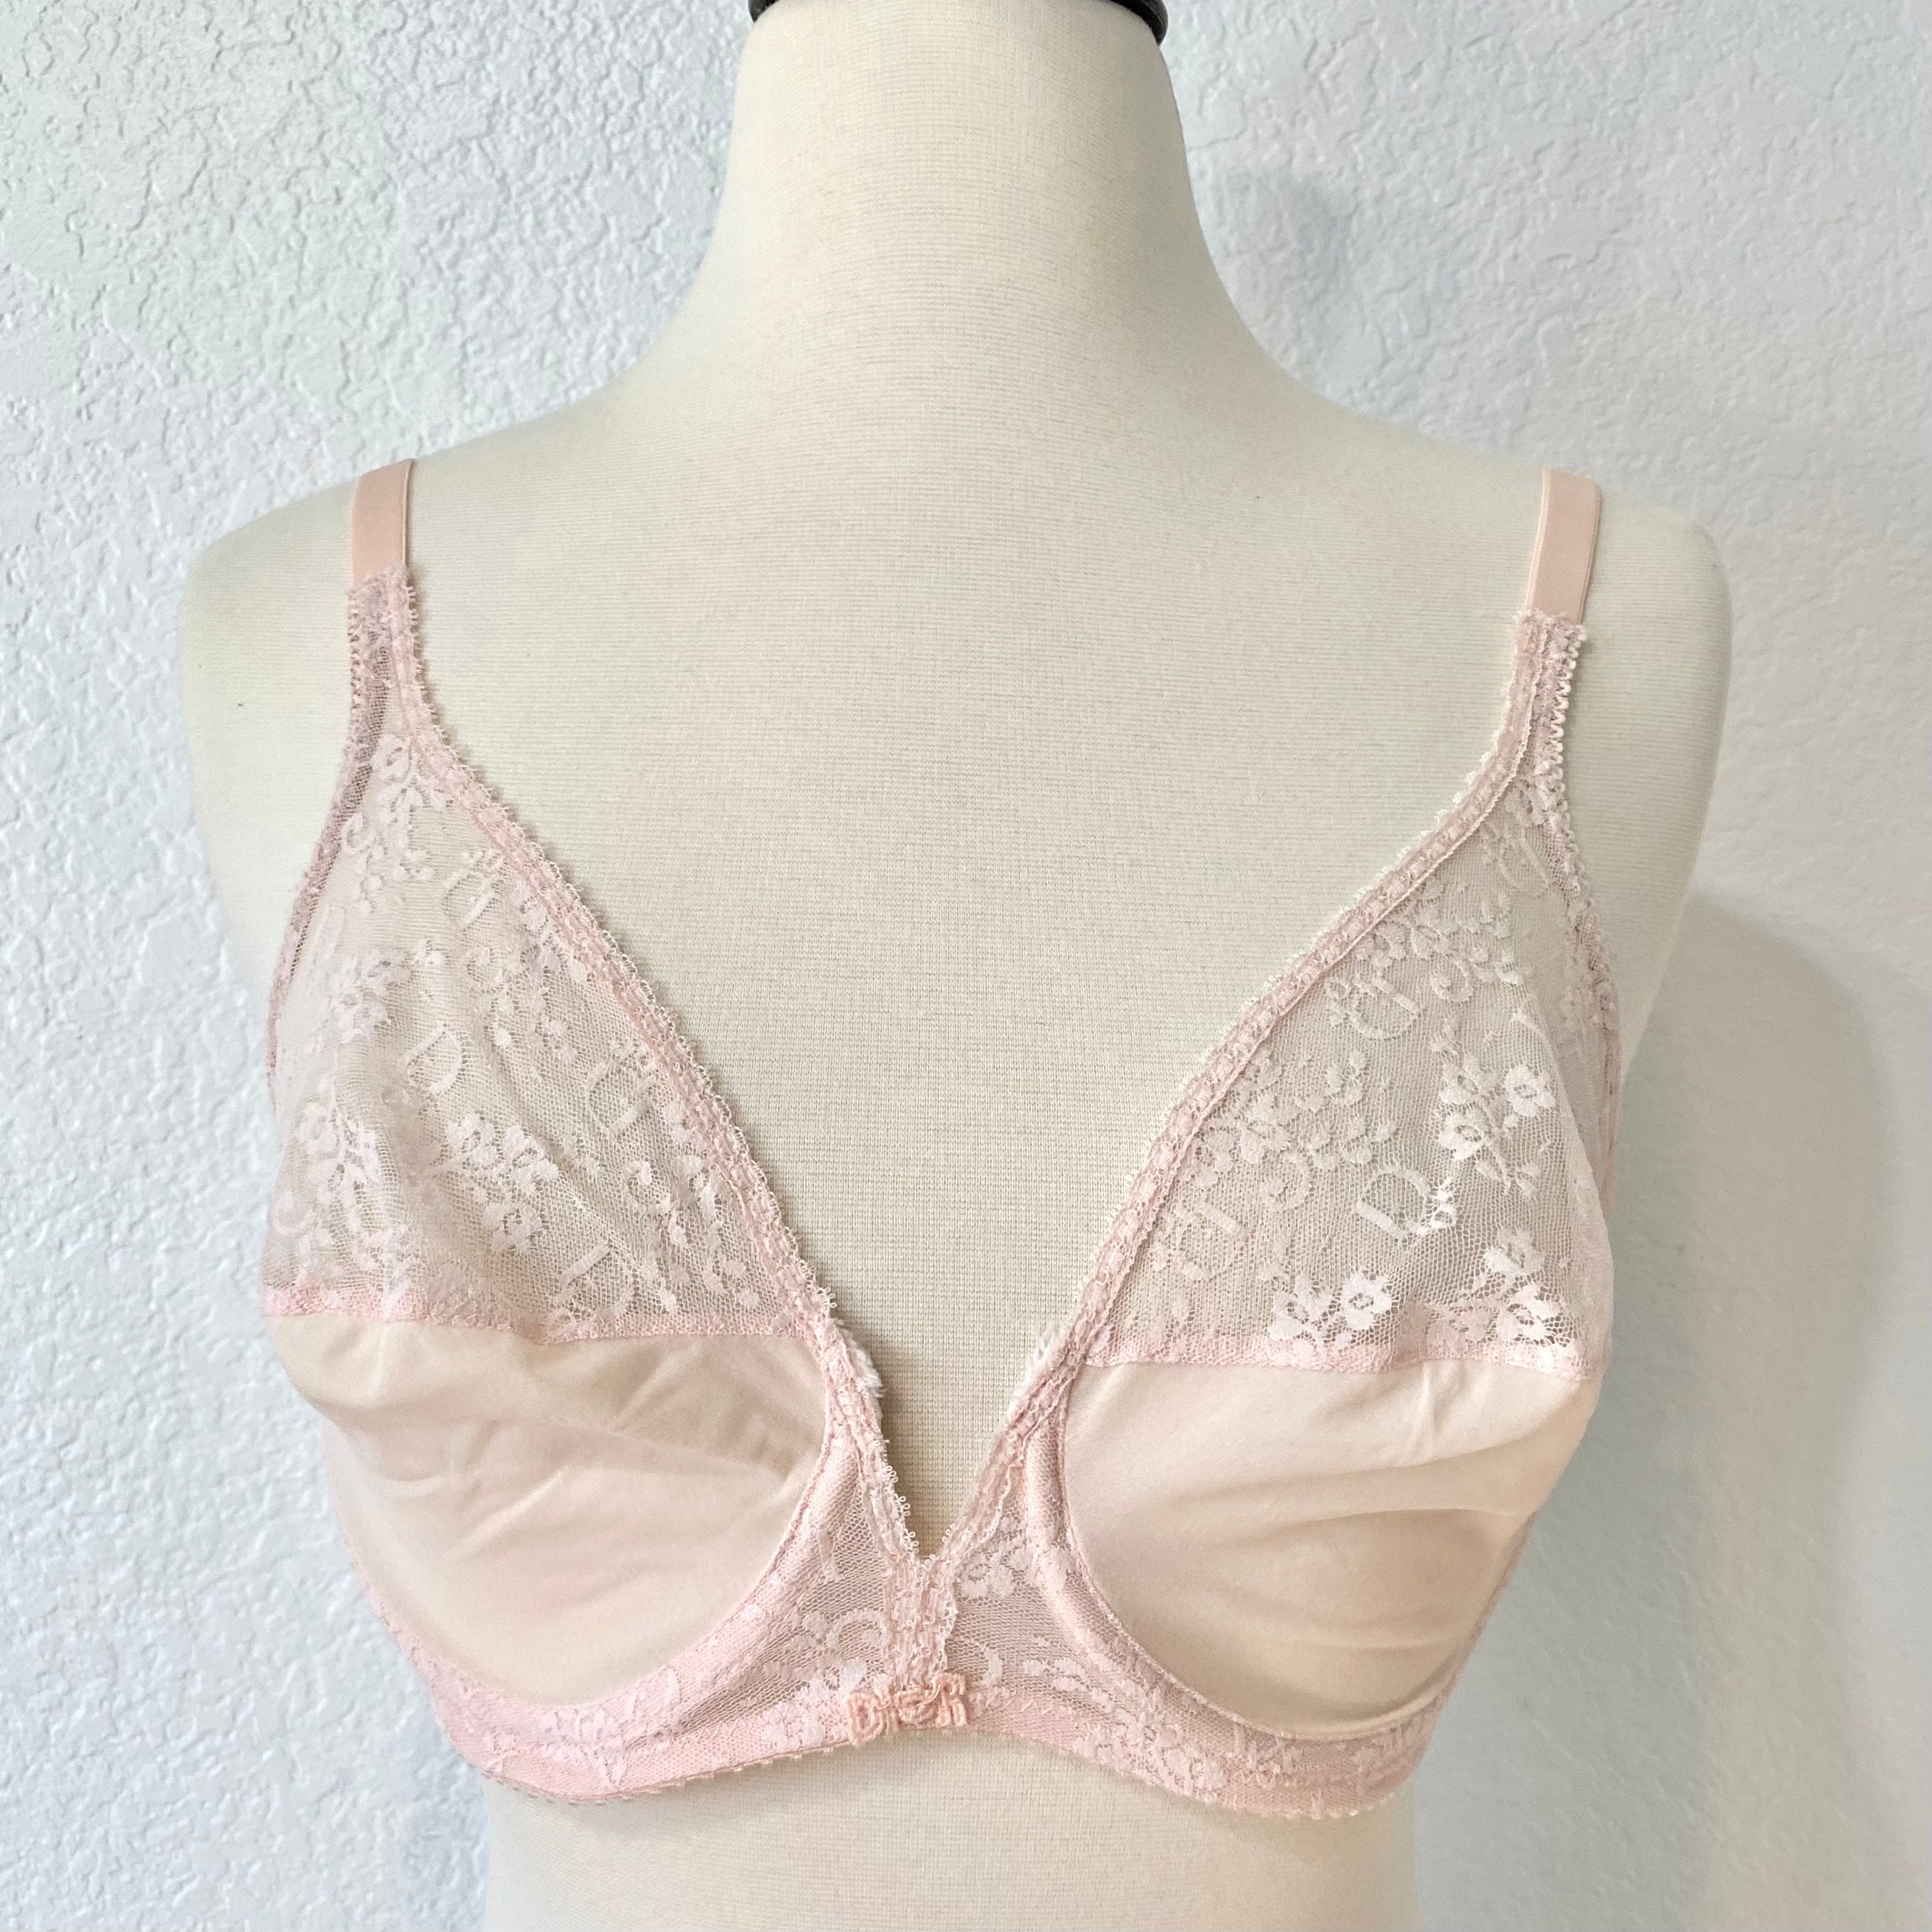 Vintage 1980s Christian Dior Intimates Light Pink Bra New With Tags, dior  Embroidered Sheer & Lace Bra Underwire Bras, Womens Lingerie 